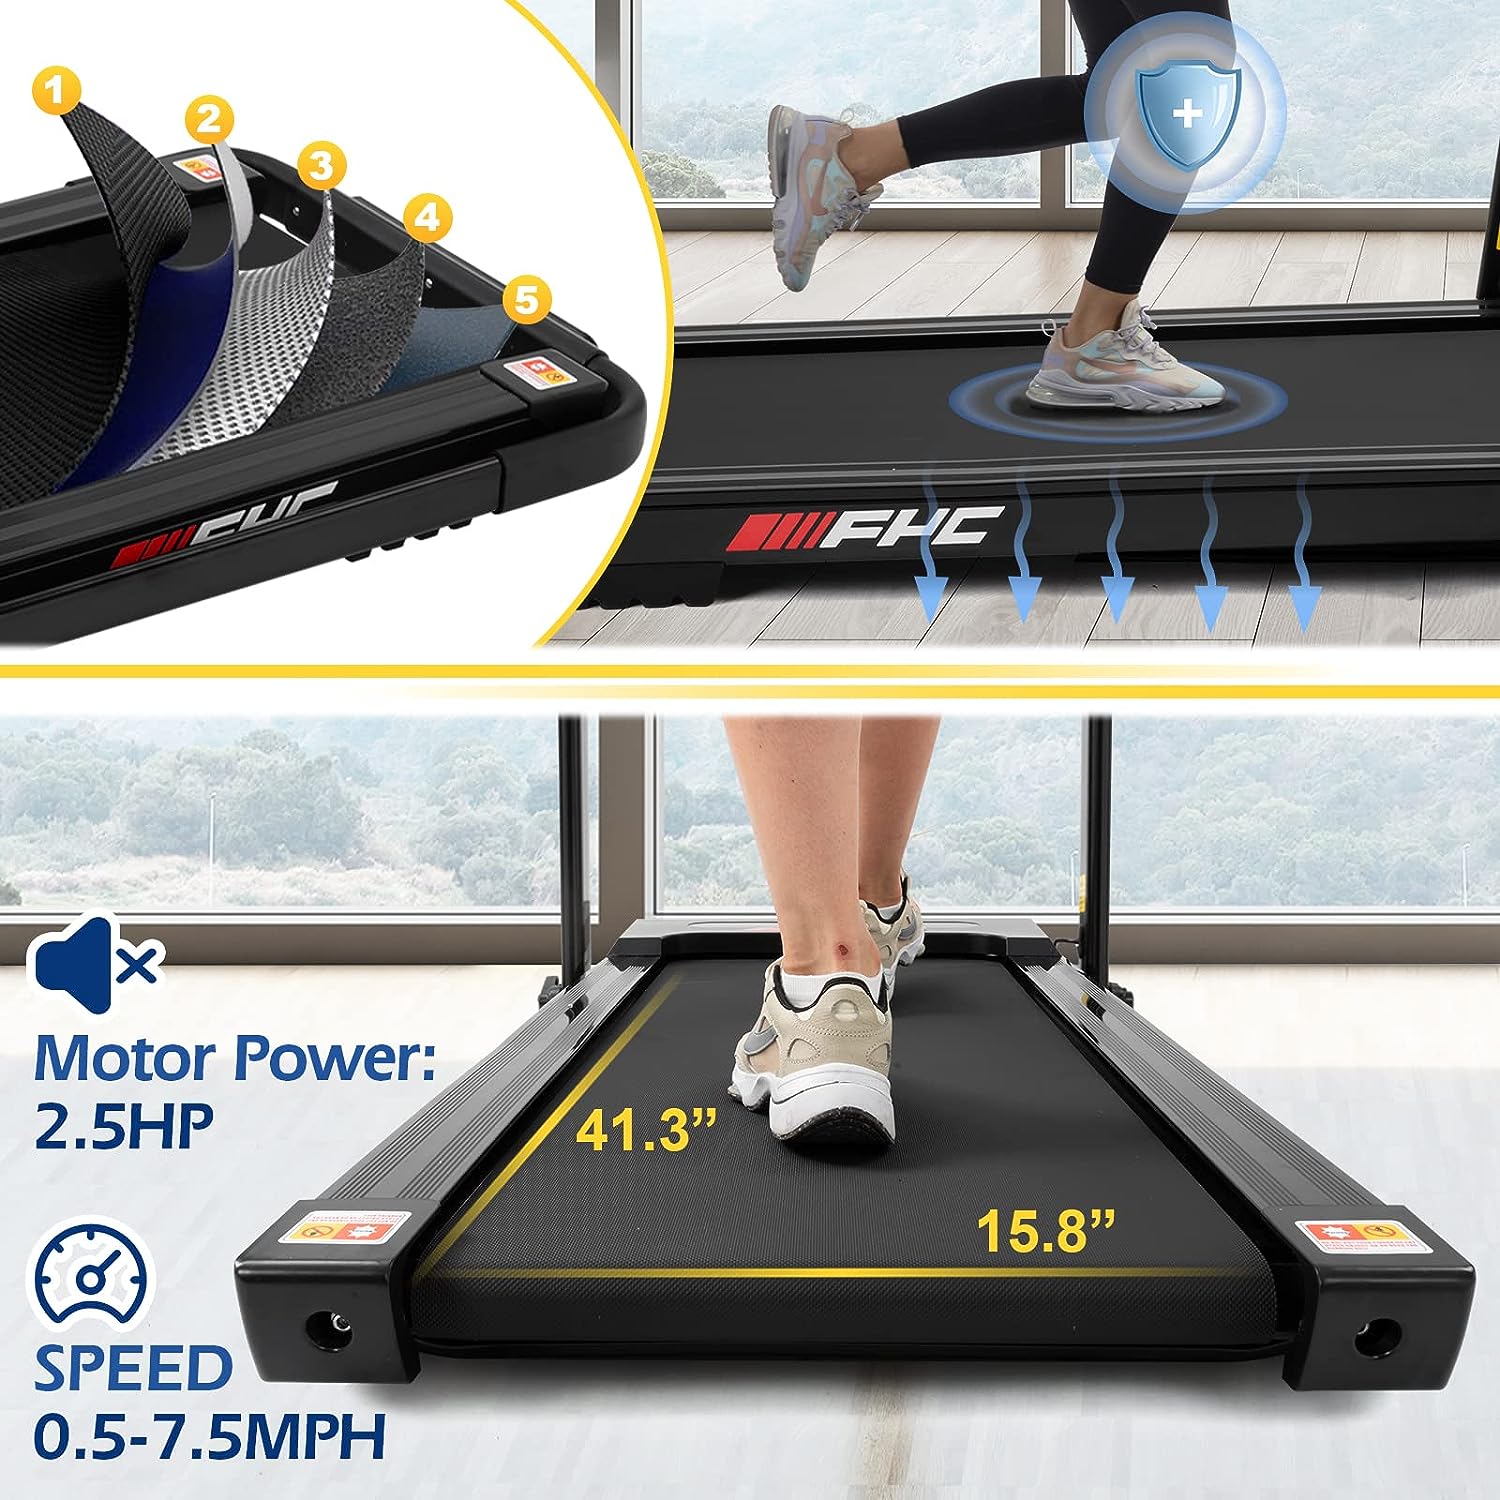 FYC Under Desk Treadmill - 2 in 1 Folding Treadmill Desk Workstation for Home 3.5HP 300LBS Weight Capacity, Free Installation Foldable Treadmill Compact Electric Running Machine for Office